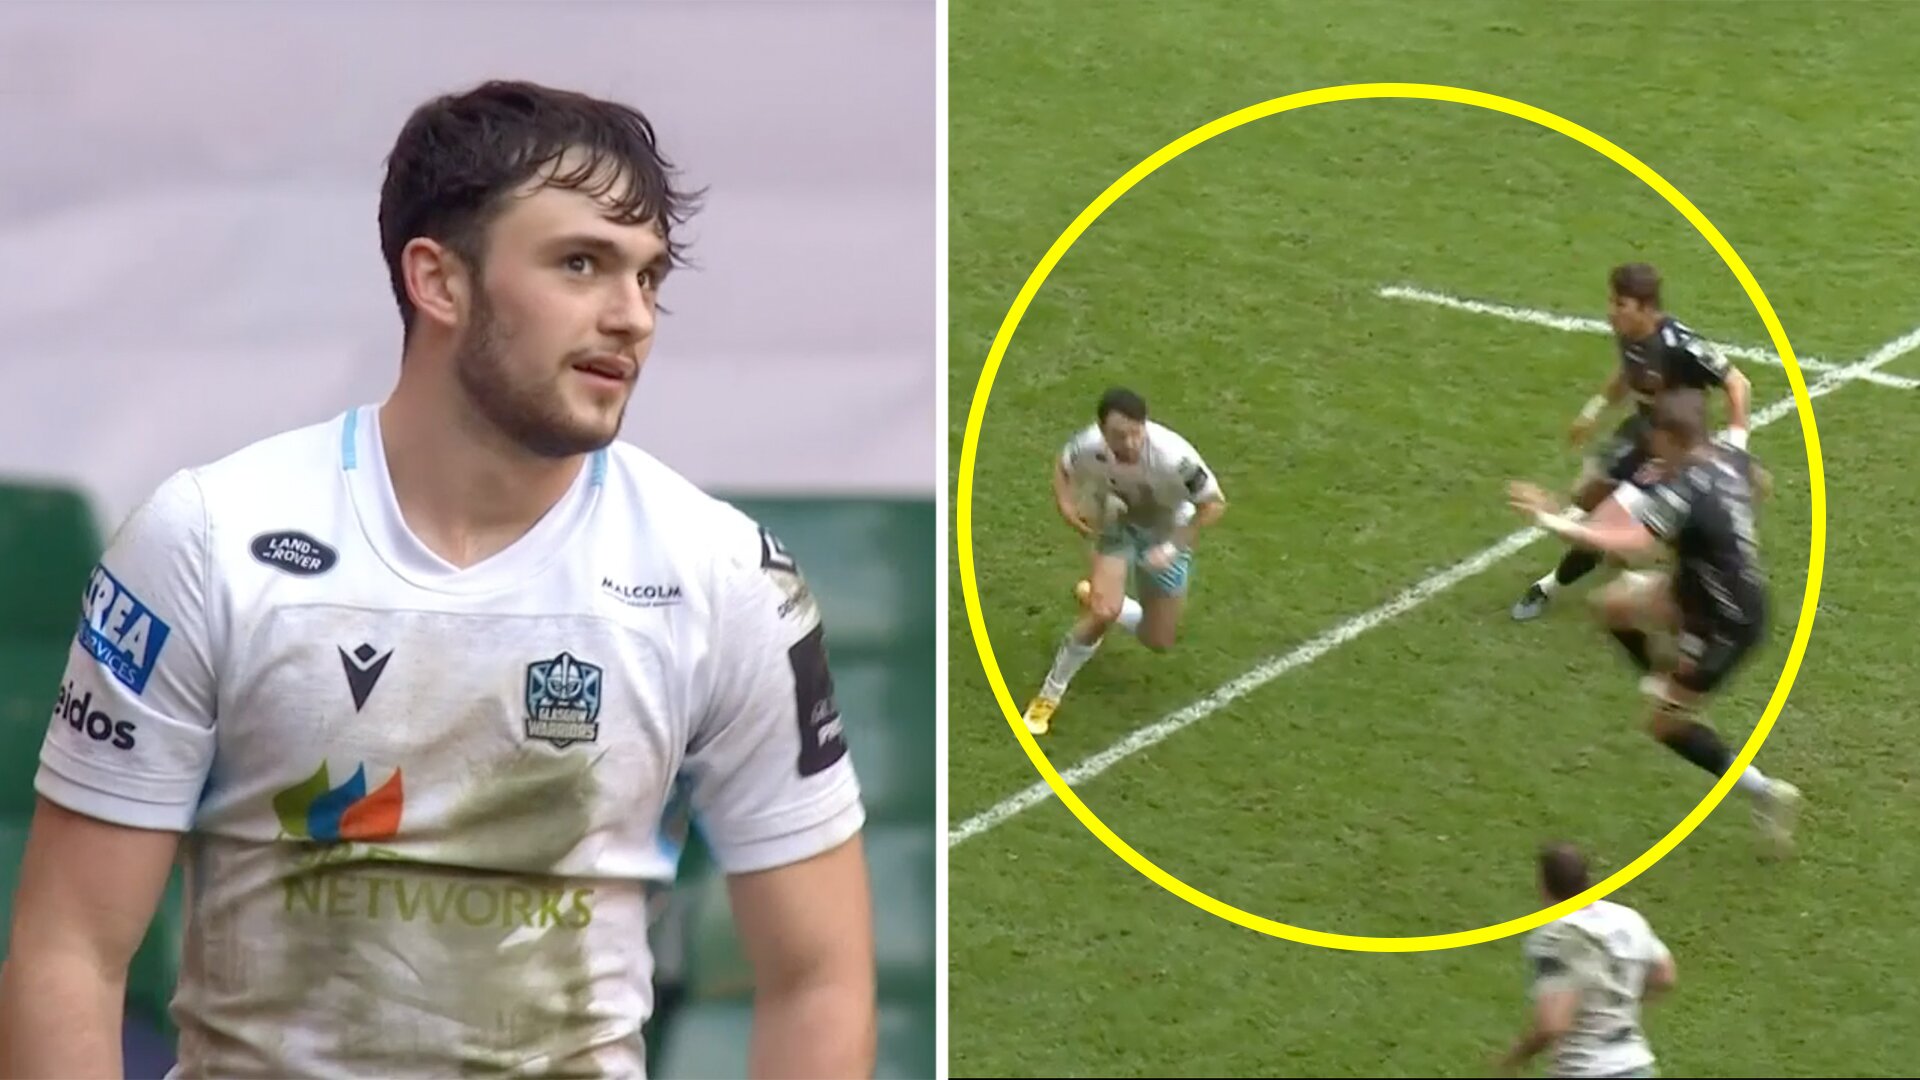 21-year-old Scotsman could beat Louis Rees-Zammit to Lions Bolter spot after ridiculous solo try